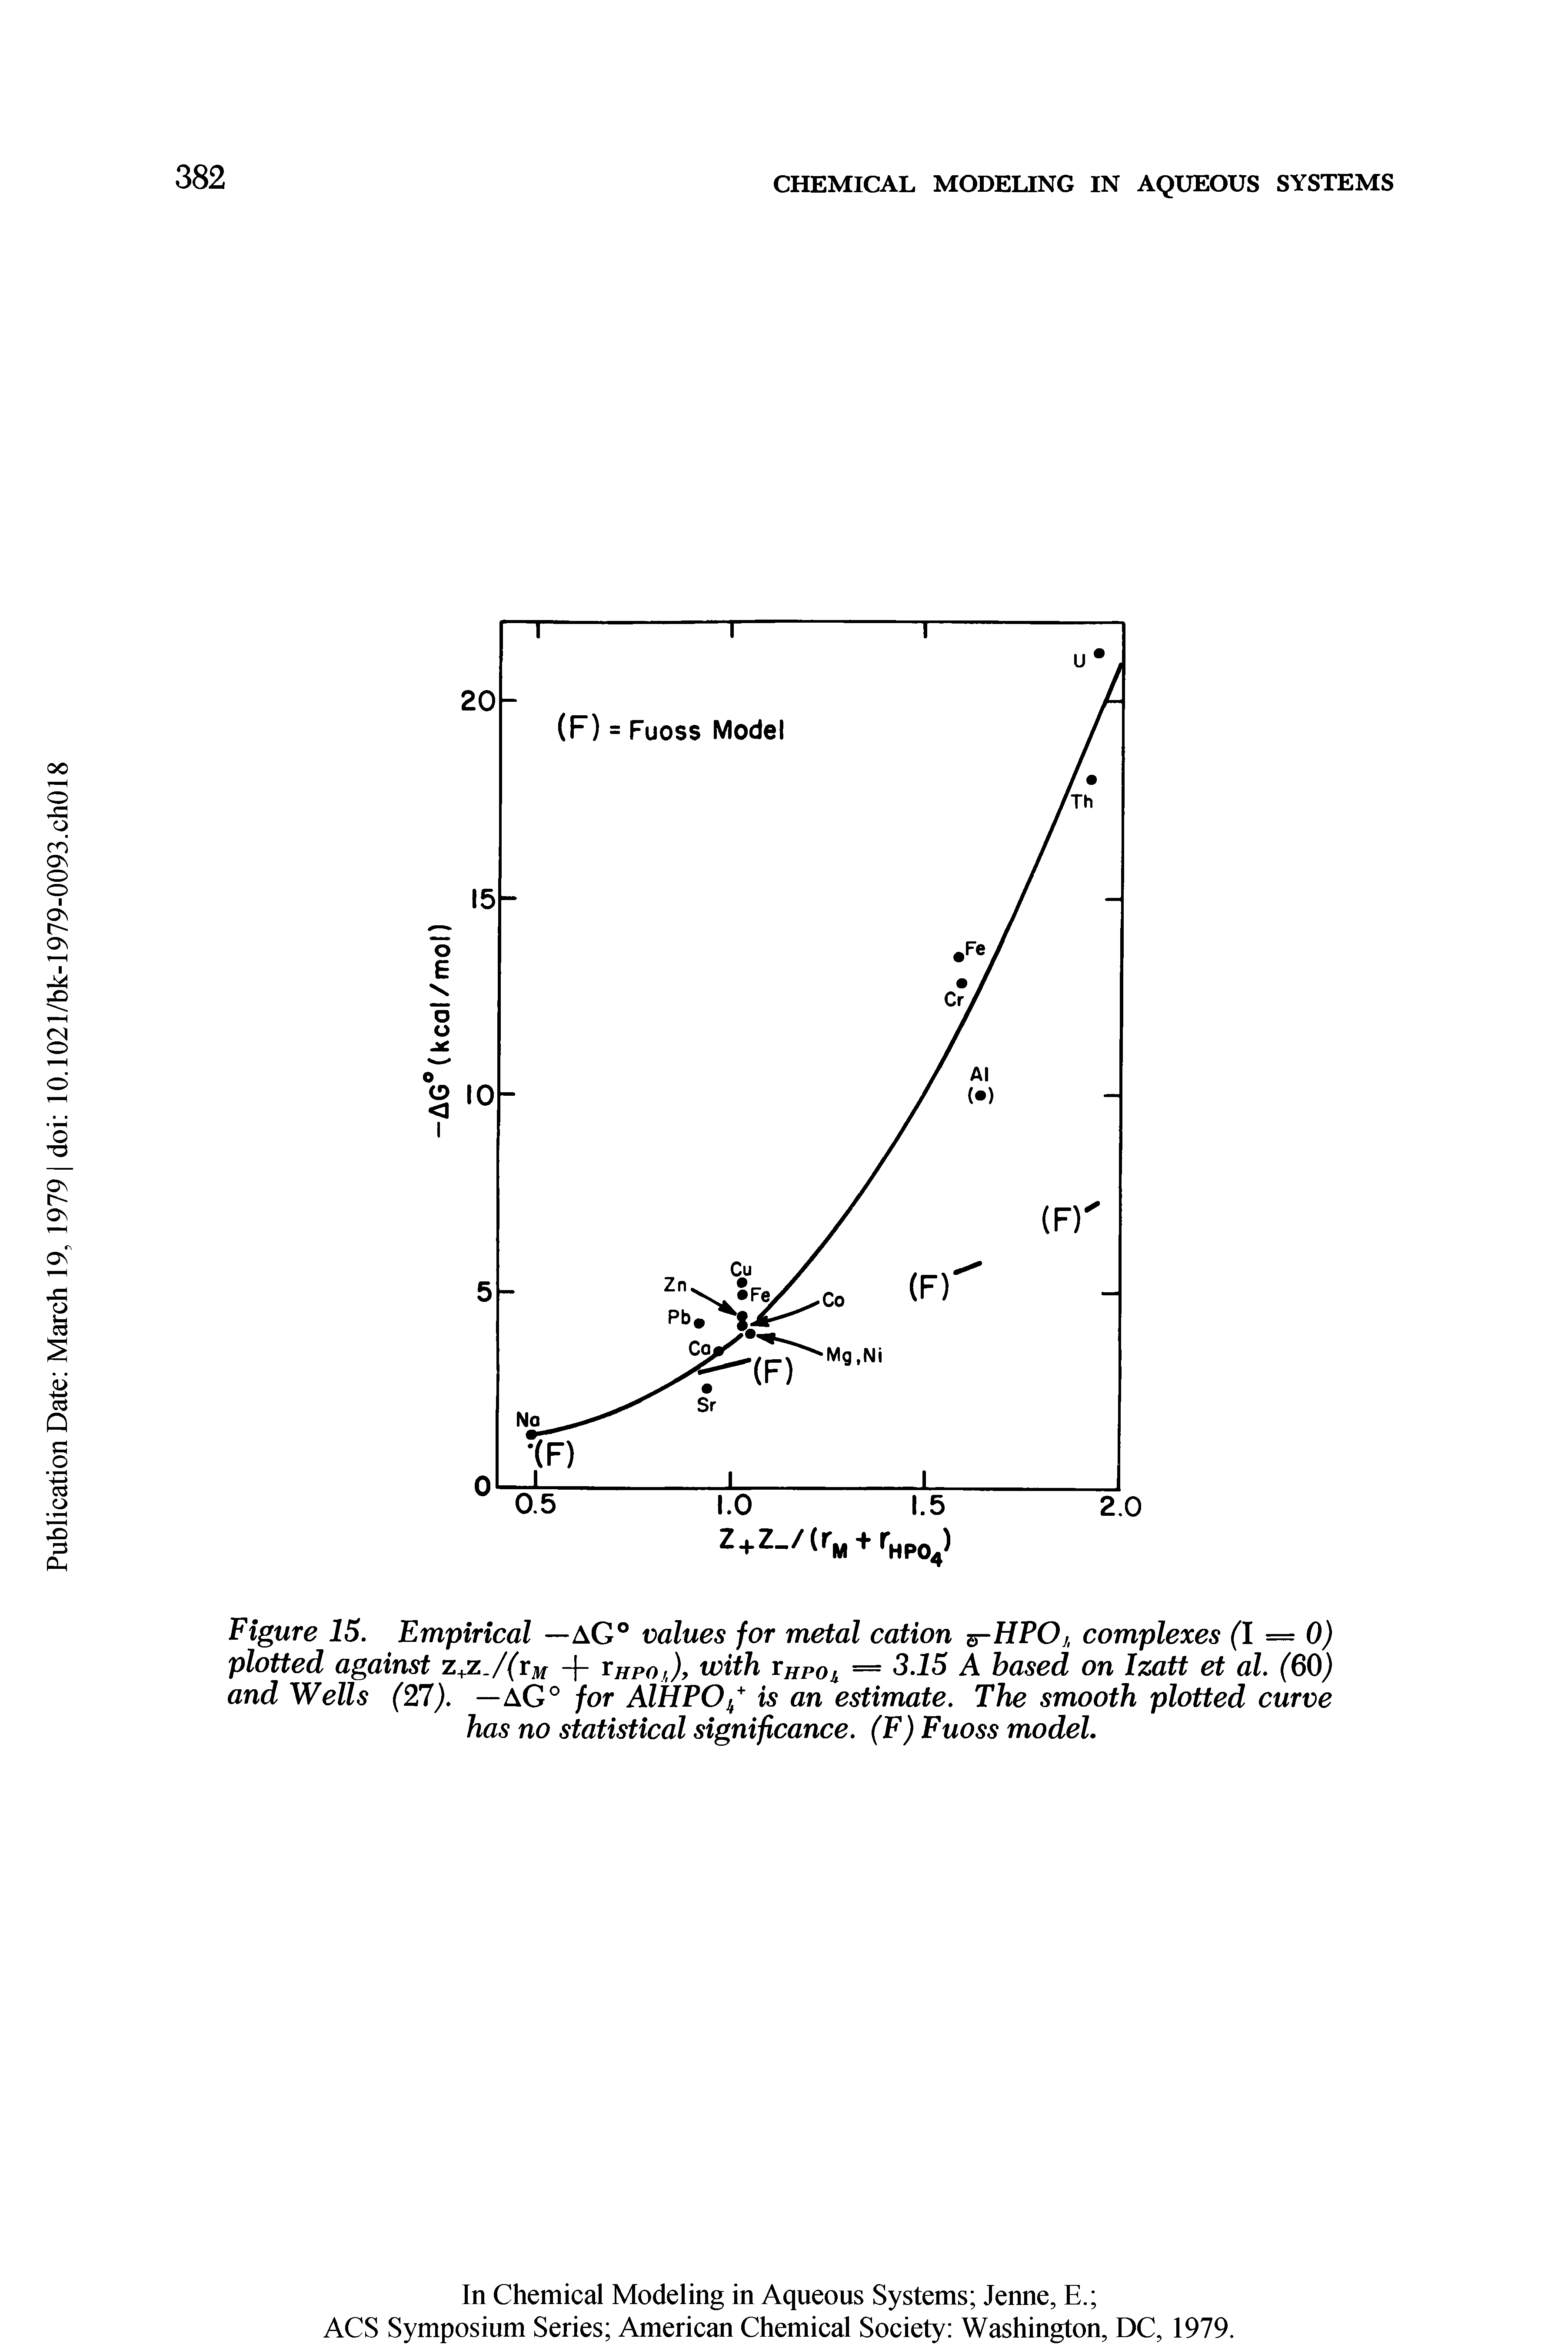 Figure 15. Empirical —aG° values for metal cation HPOj, complexes (1 = 0) plotted against t.+7.J(ym + ri/po j, with thpo = 3.15 A based on Izatt et al. (60) and Wells (27). — aG° for AlHPOj, is an estimate. The smooth plotted curve has no statistical significance. (F) Fuoss model.